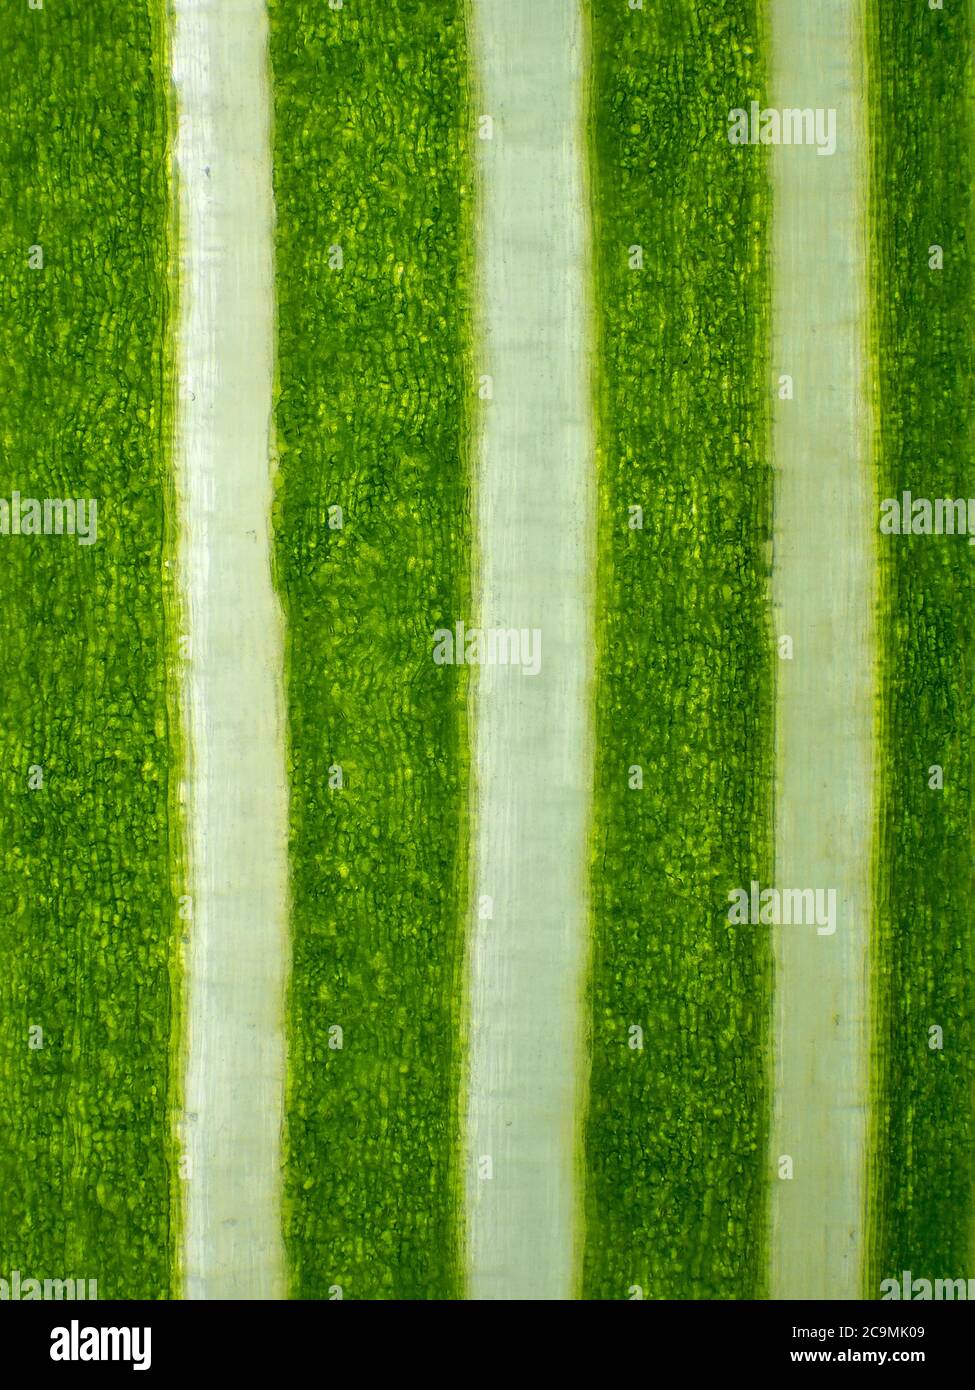 Lapsana communis (nipplewort) stem under the microscope, vertical field of view is about 3mm (4x objective magnification) Stock Photo